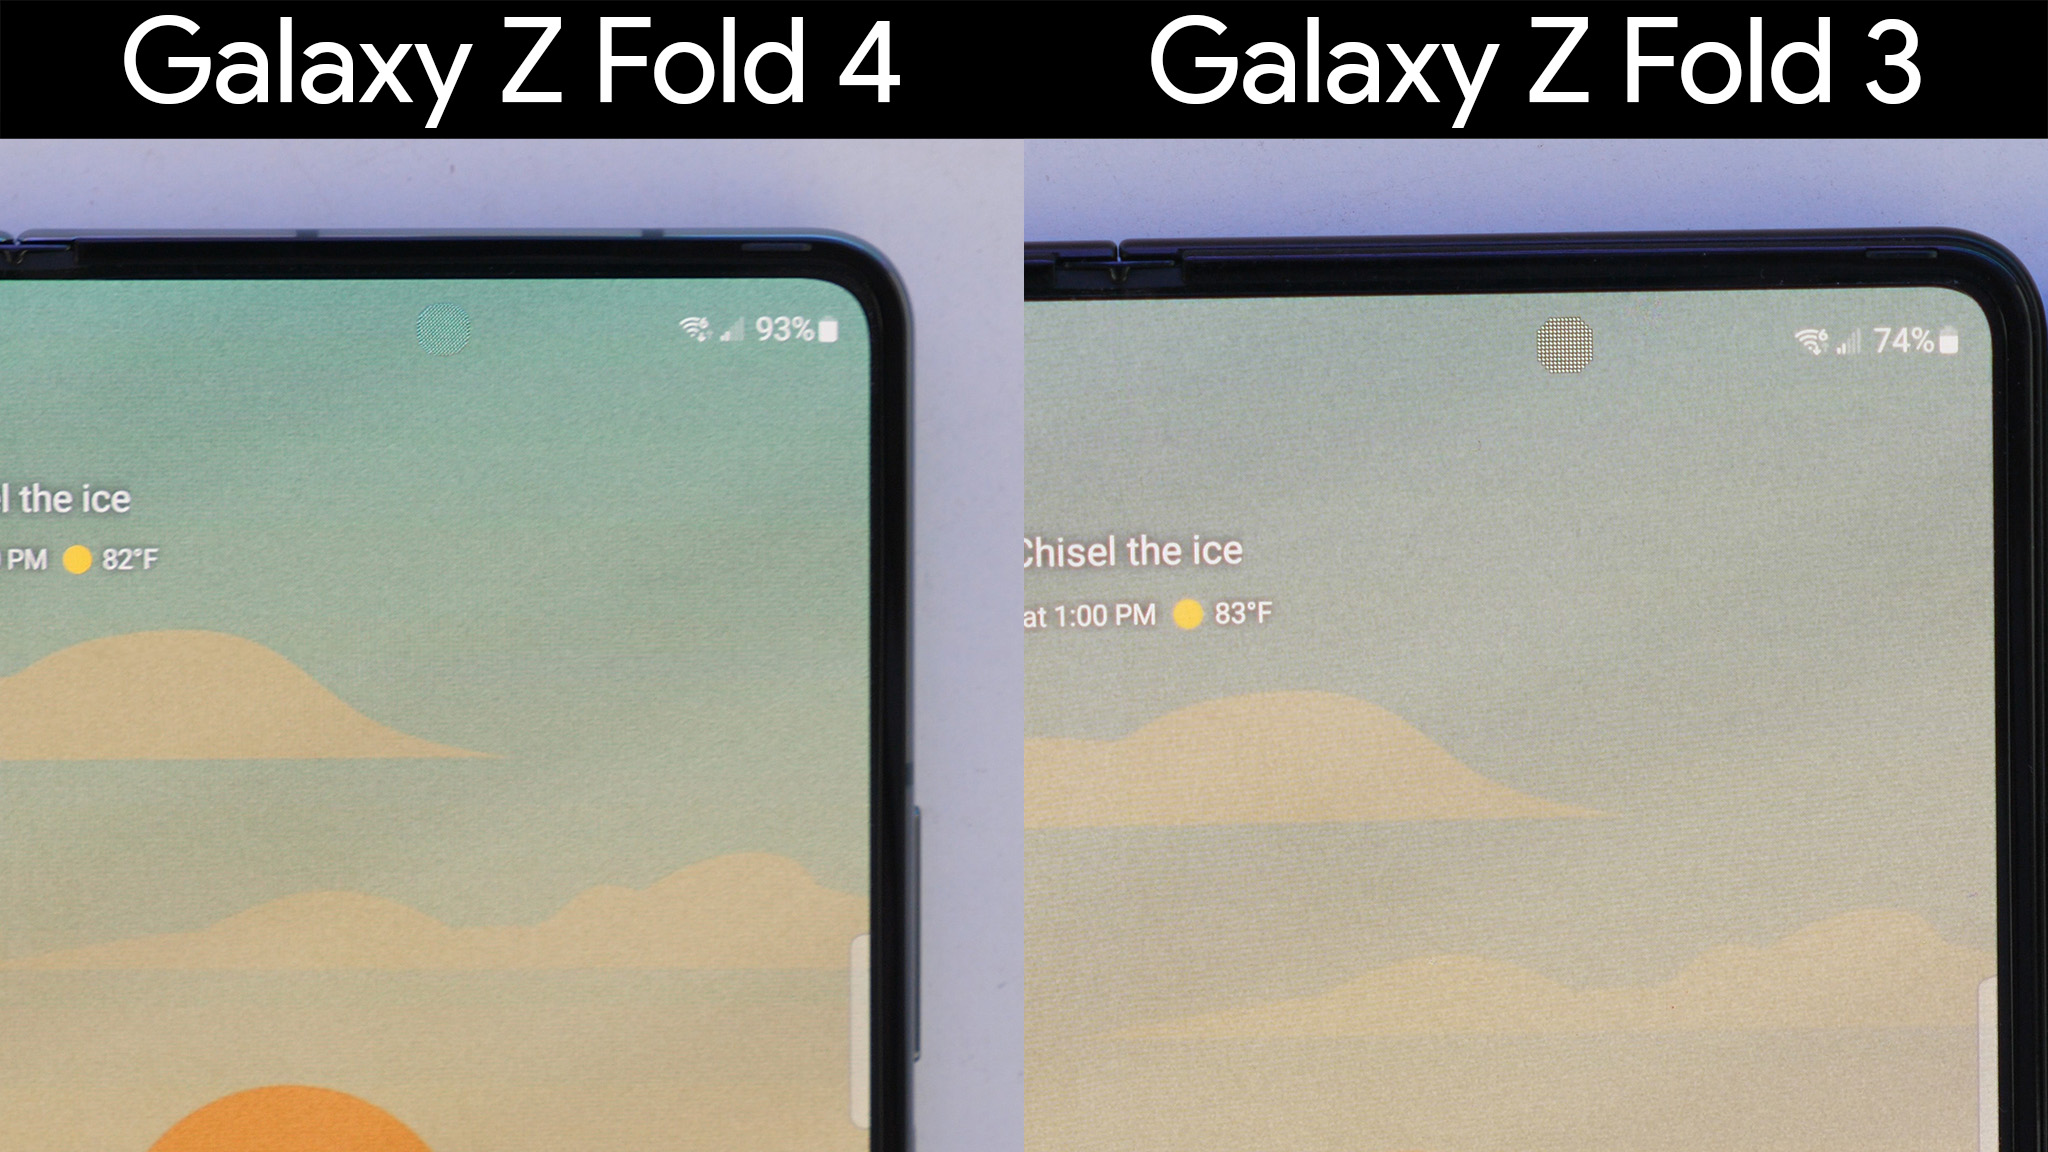 Comparing the under-display cameras on the Samsung Galaxy Z Fold 3 and Z Fold 4